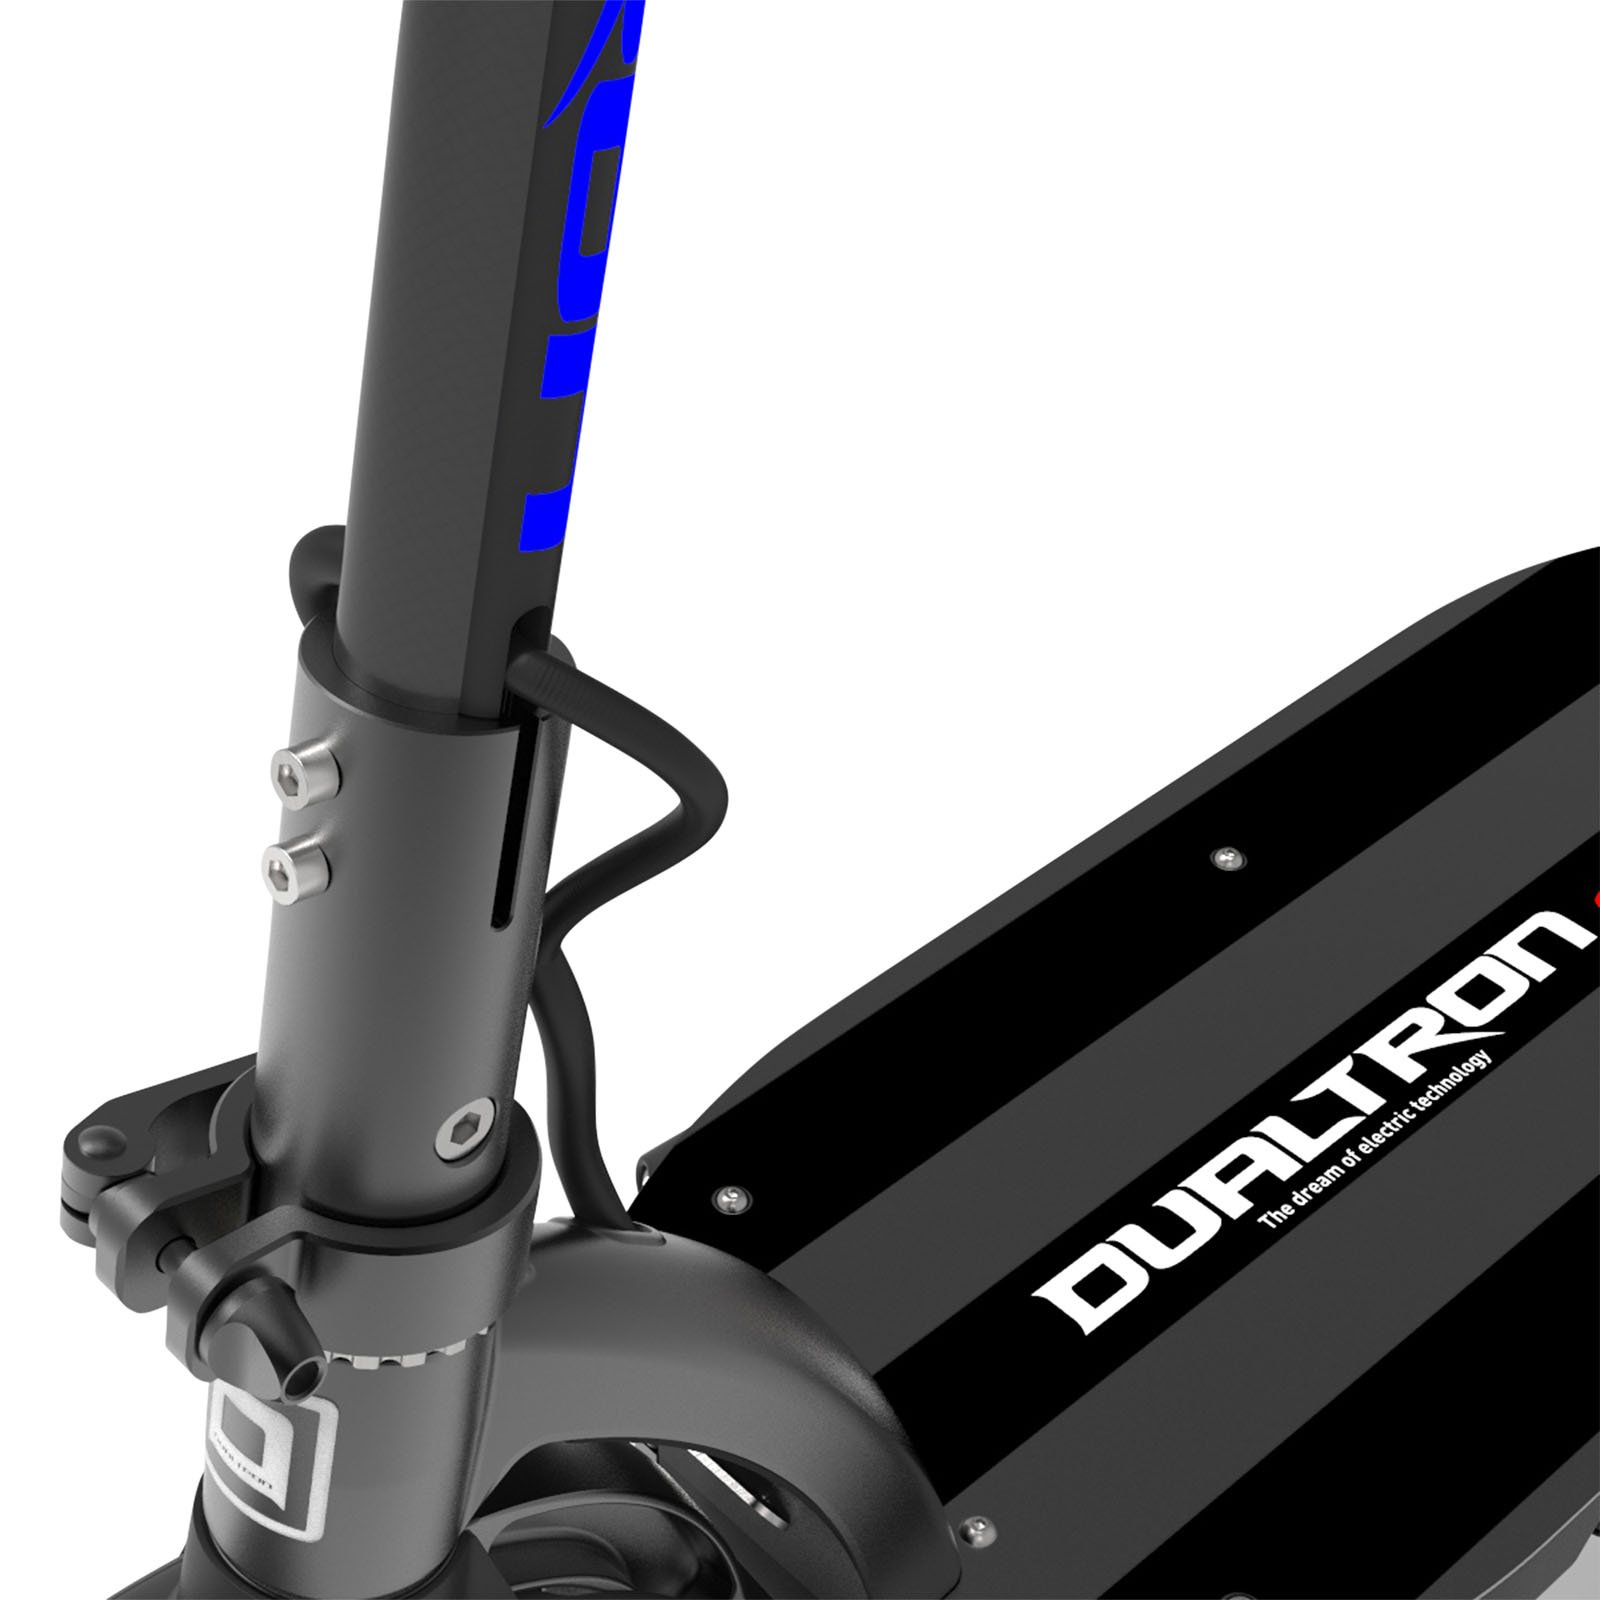 Dualtron Spider v2 Limited Edition You asked for a lightweight, powerful electric scooter that is easy to take with you on the train and bus. Dualtron's answer is the new Dualtron Spider!  Featuring all the great technology that is in the larger Dualtron Scooters, the Dualtron Spider has 3,000 watt BLDC magnesium alloy motors and carbon fiber handlebars to shave off the added weight.  20 kilo, 60 km range, and a max capable speed of 60 kilometers per hour.  Nuff said! The Dualtron Spider Limited comes with a 40% larger capacity battery (24.5Ah vs 17.5Ah) and wider tires (2.25" vs 2") then the regular Spider. Speed: 60km Range: 60km  